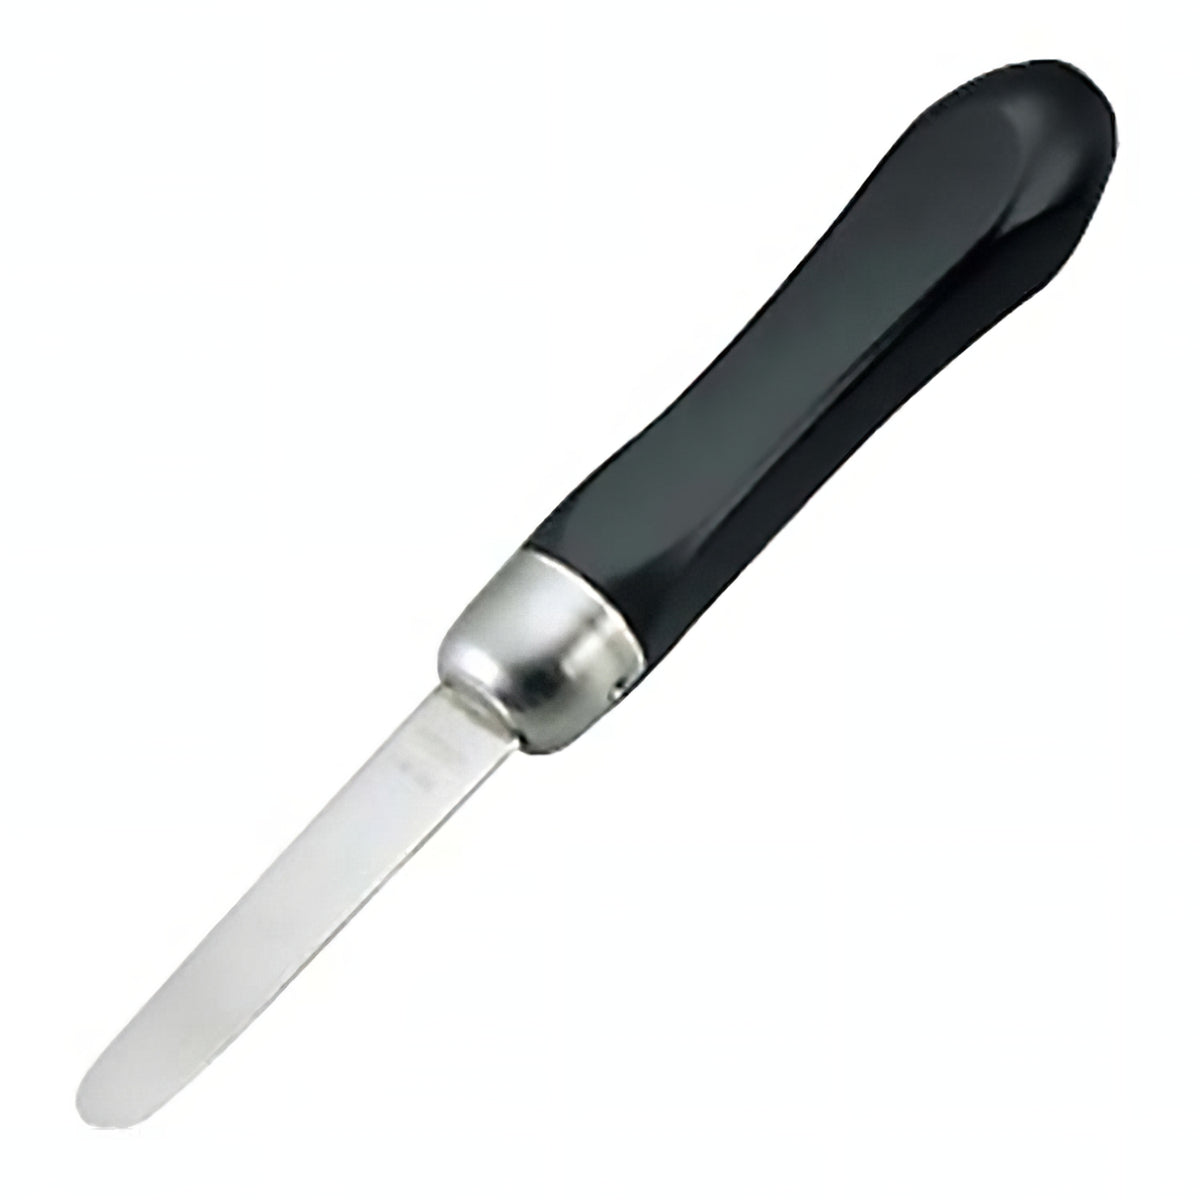 EBM Stainless Steel Ark Shell Knife with Black Handle